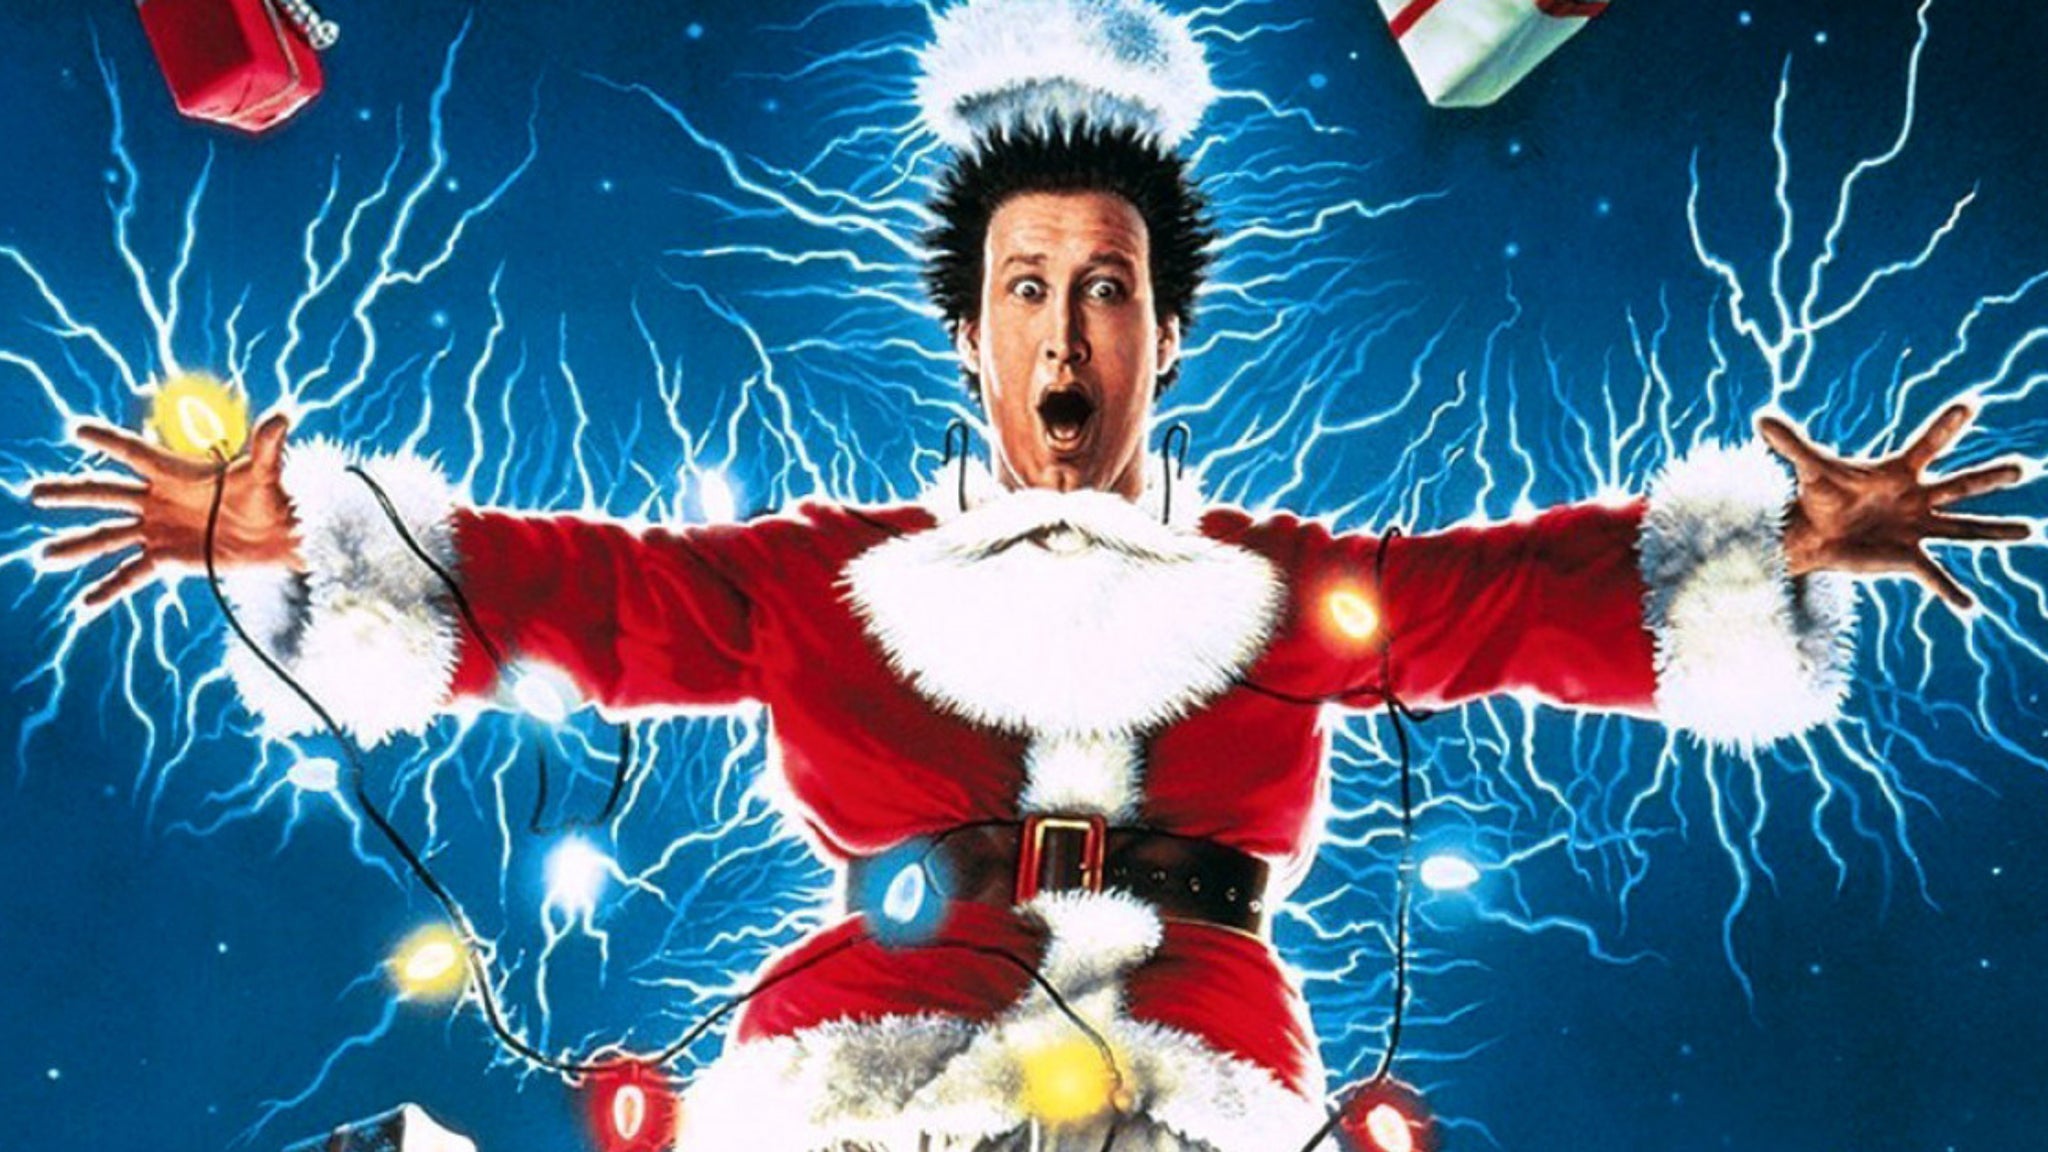 National Lampoon's Christmas Vacation Screening + Q&A with Chevy Chase in Mashantucket promo photo for Black Friday / Cyber Monday presale offer code